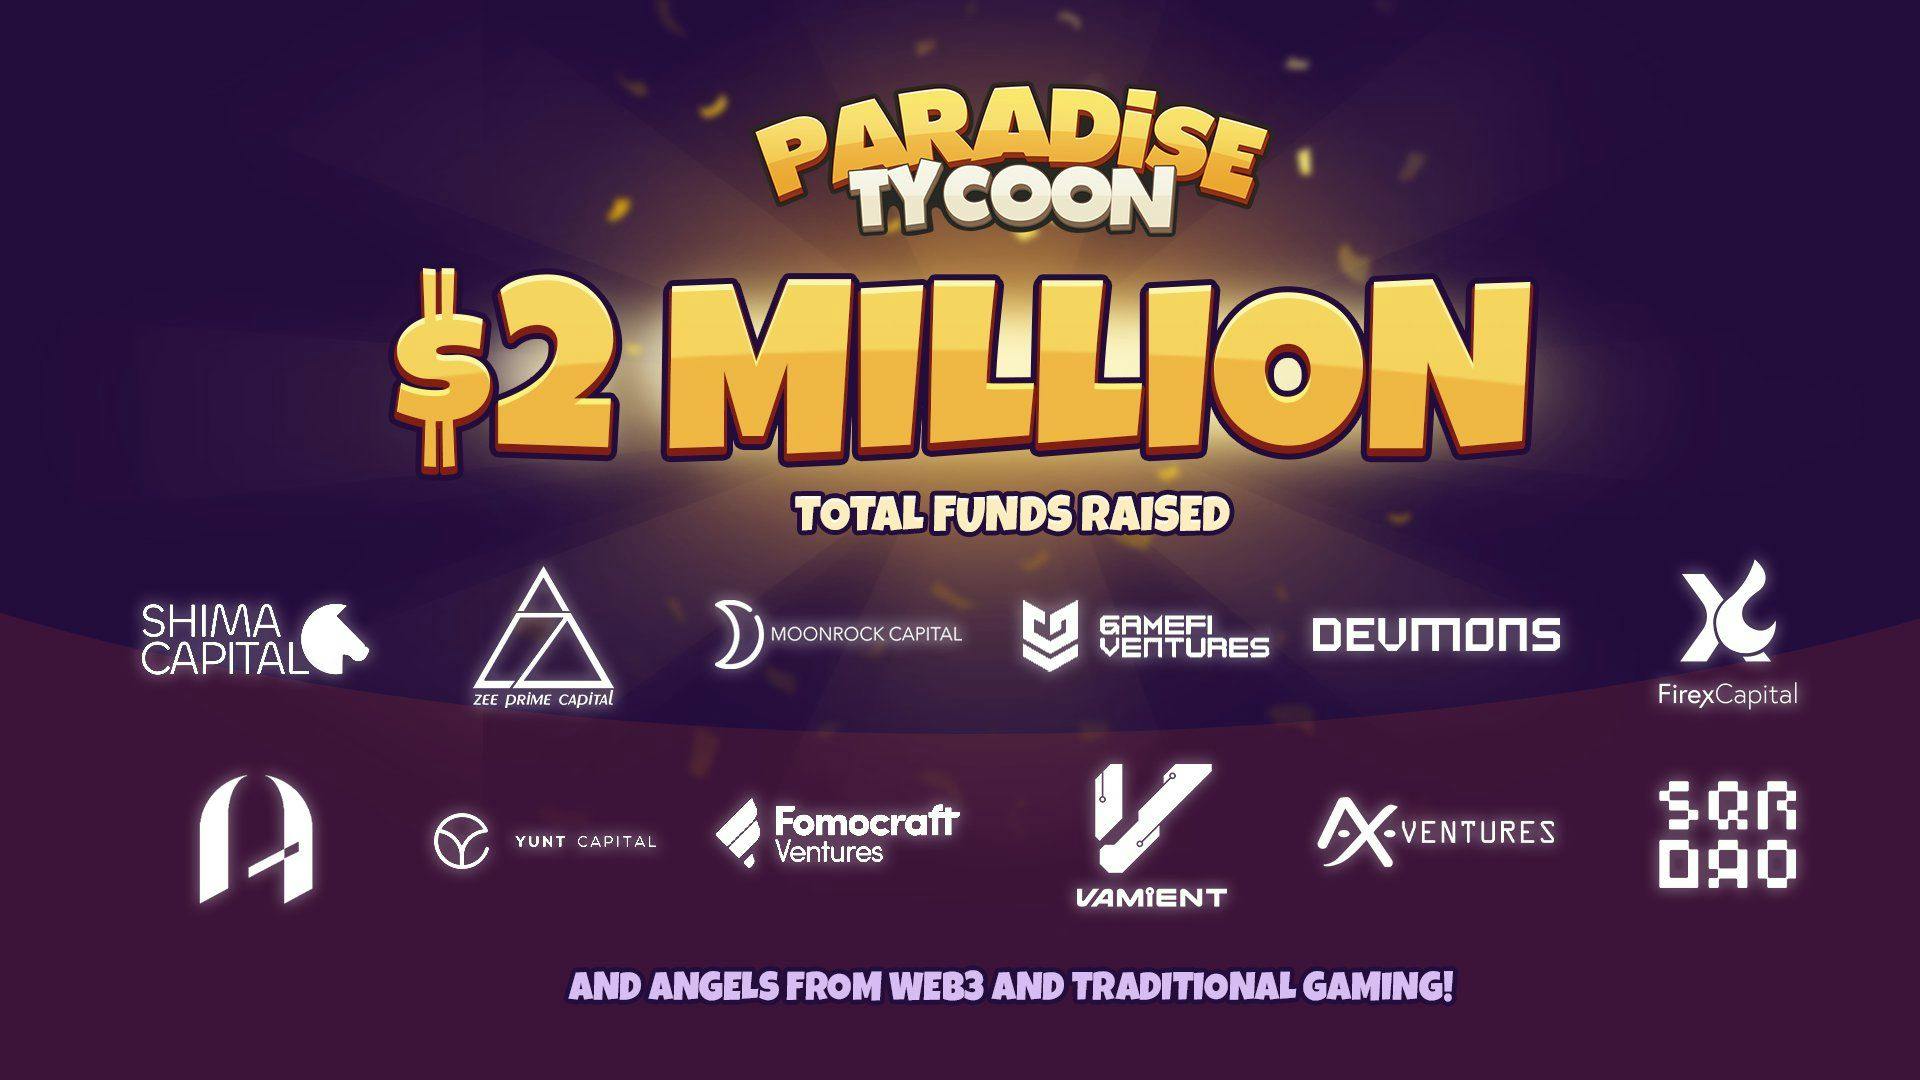 Paradise Tycoon Gold Pass NFT Mint Event